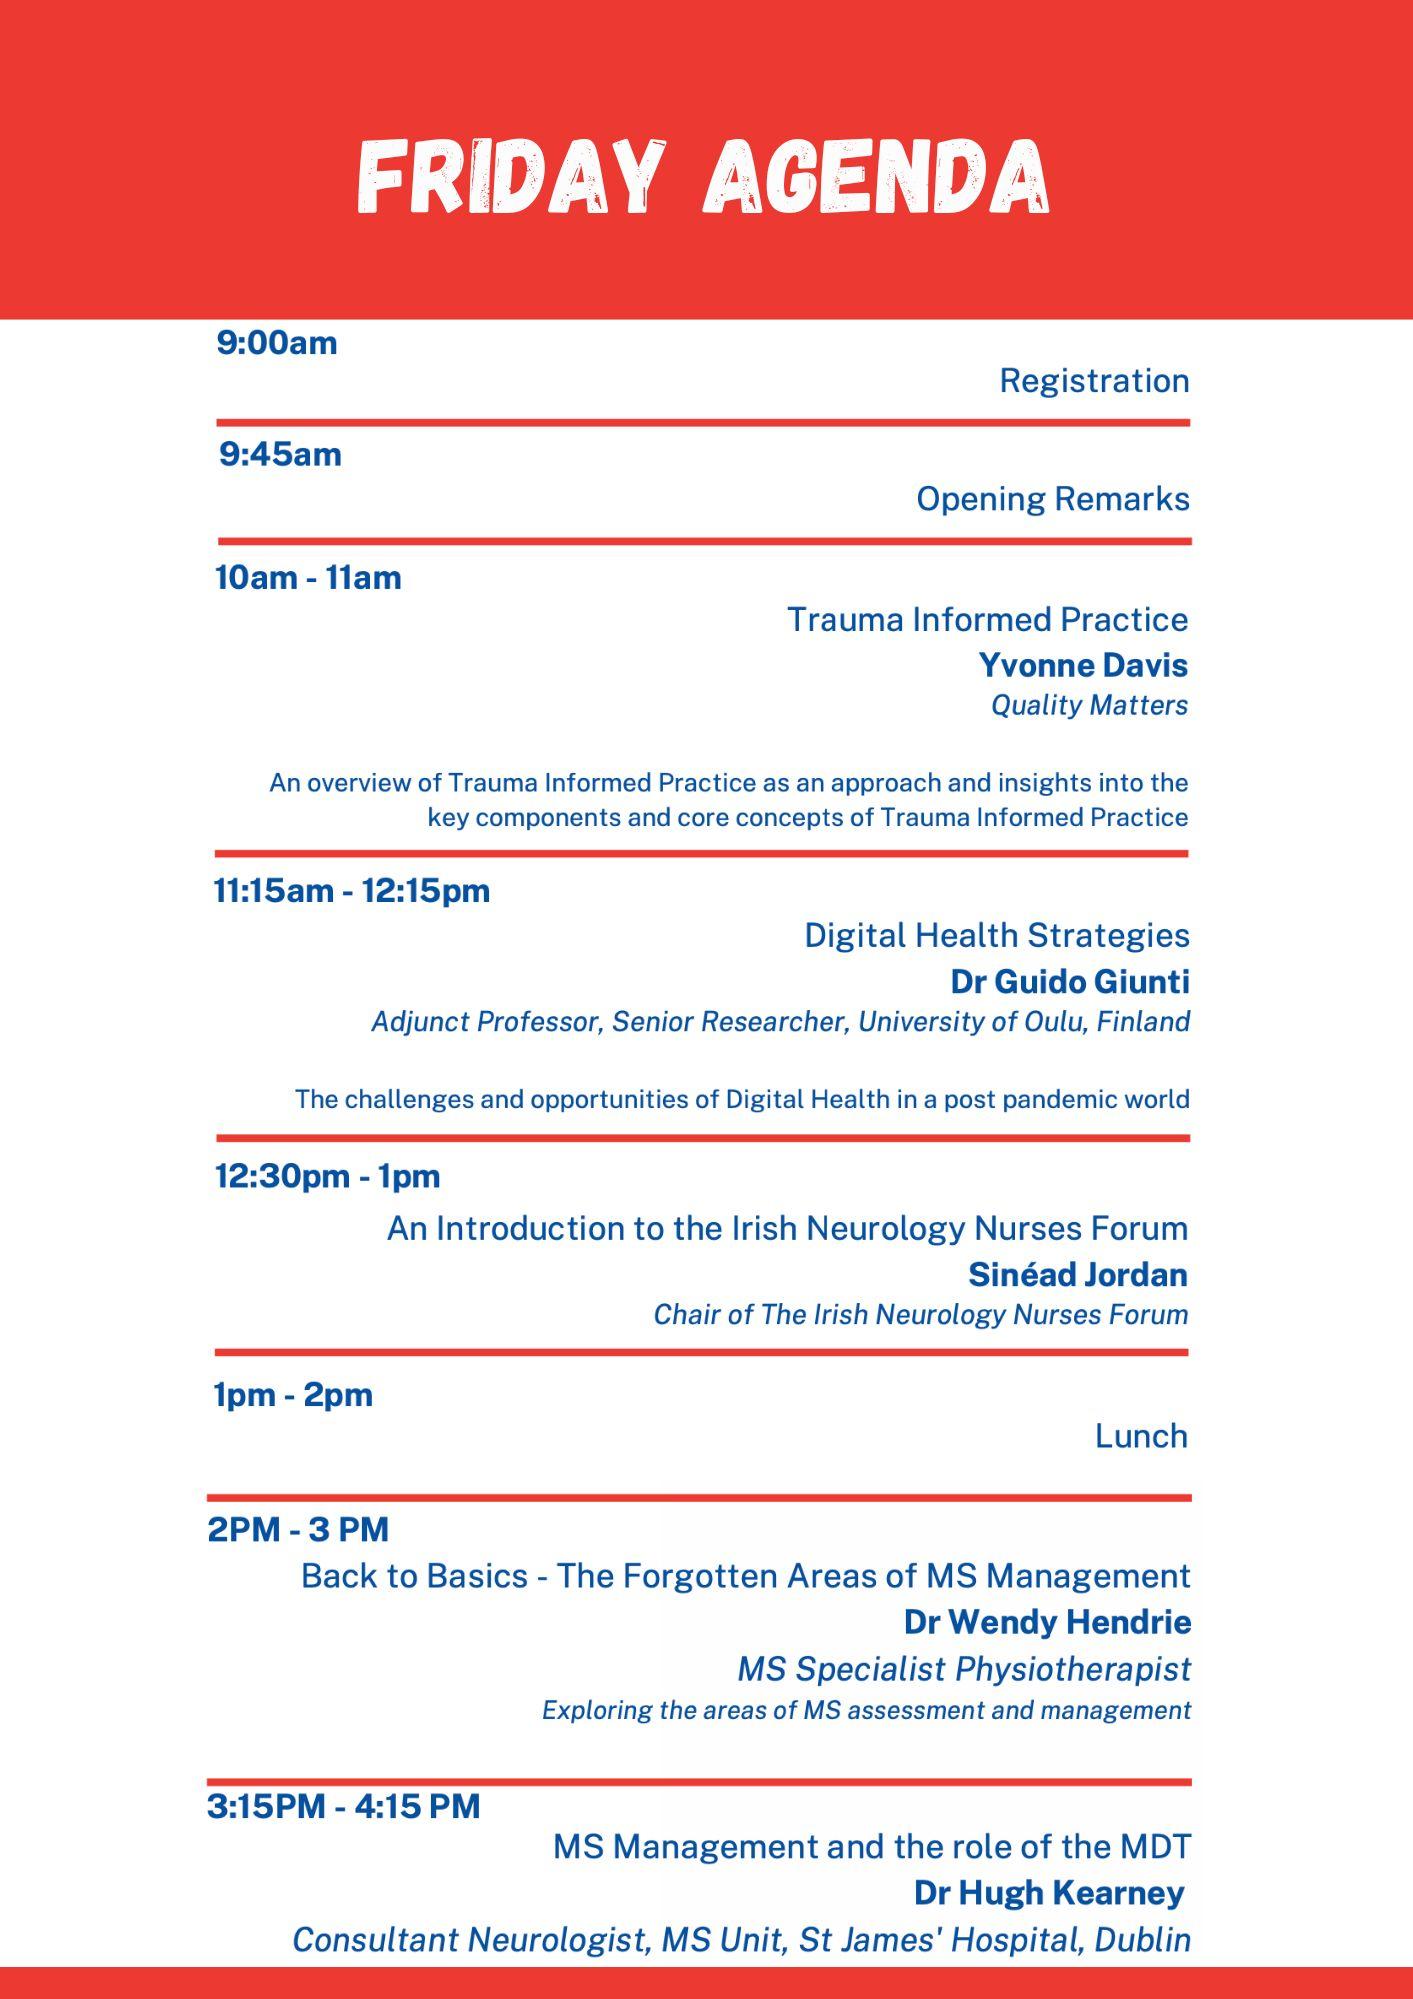 Friday agenda for National conference in blue and white background